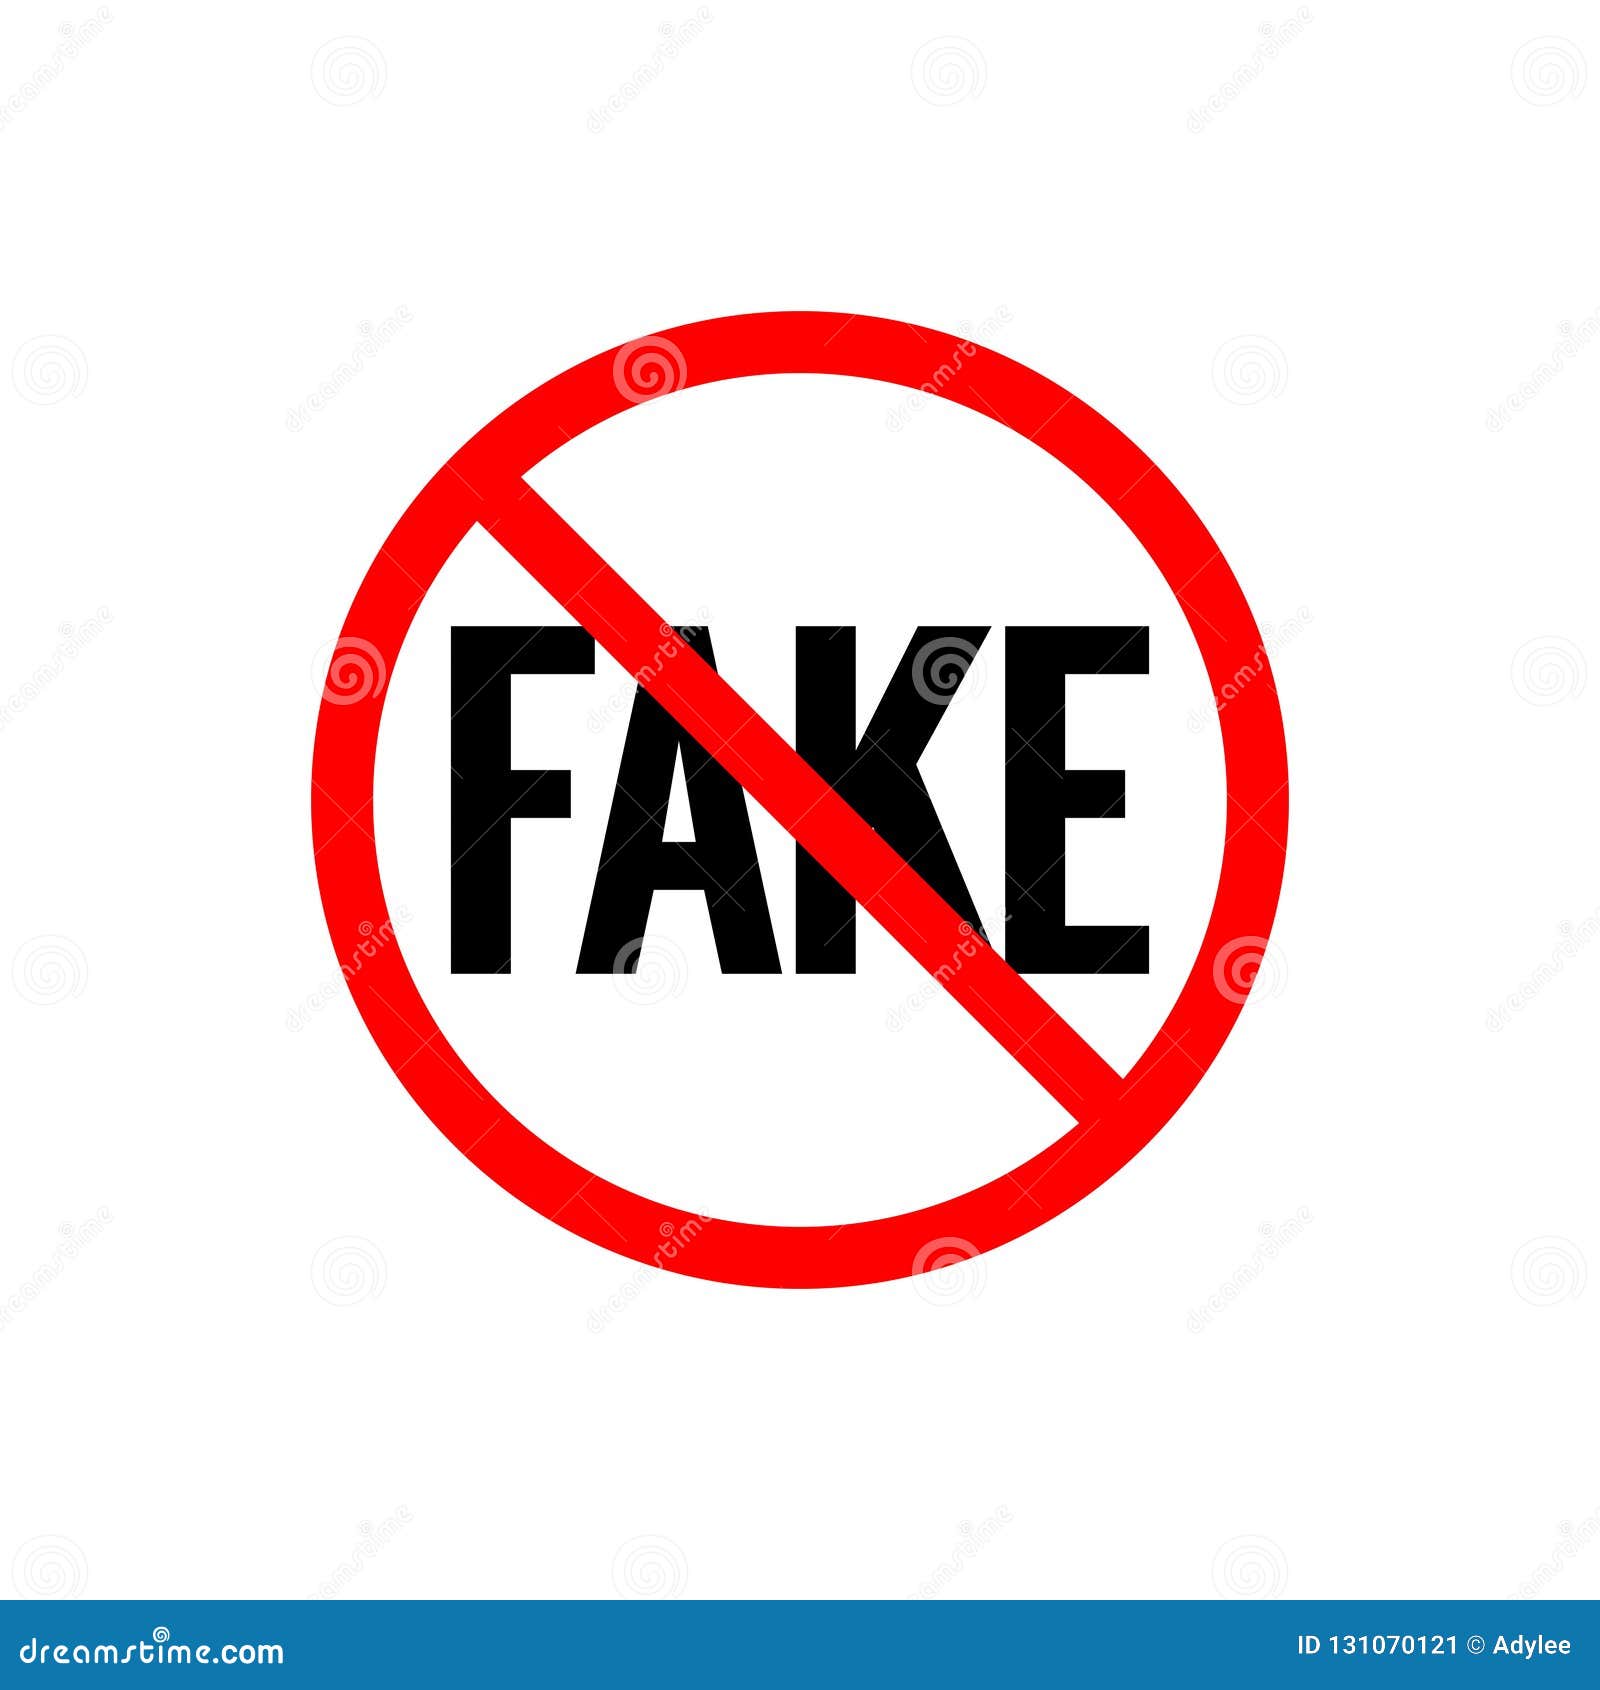 Stock Vector Fake News Illustration Isolated in White Background Stock ...